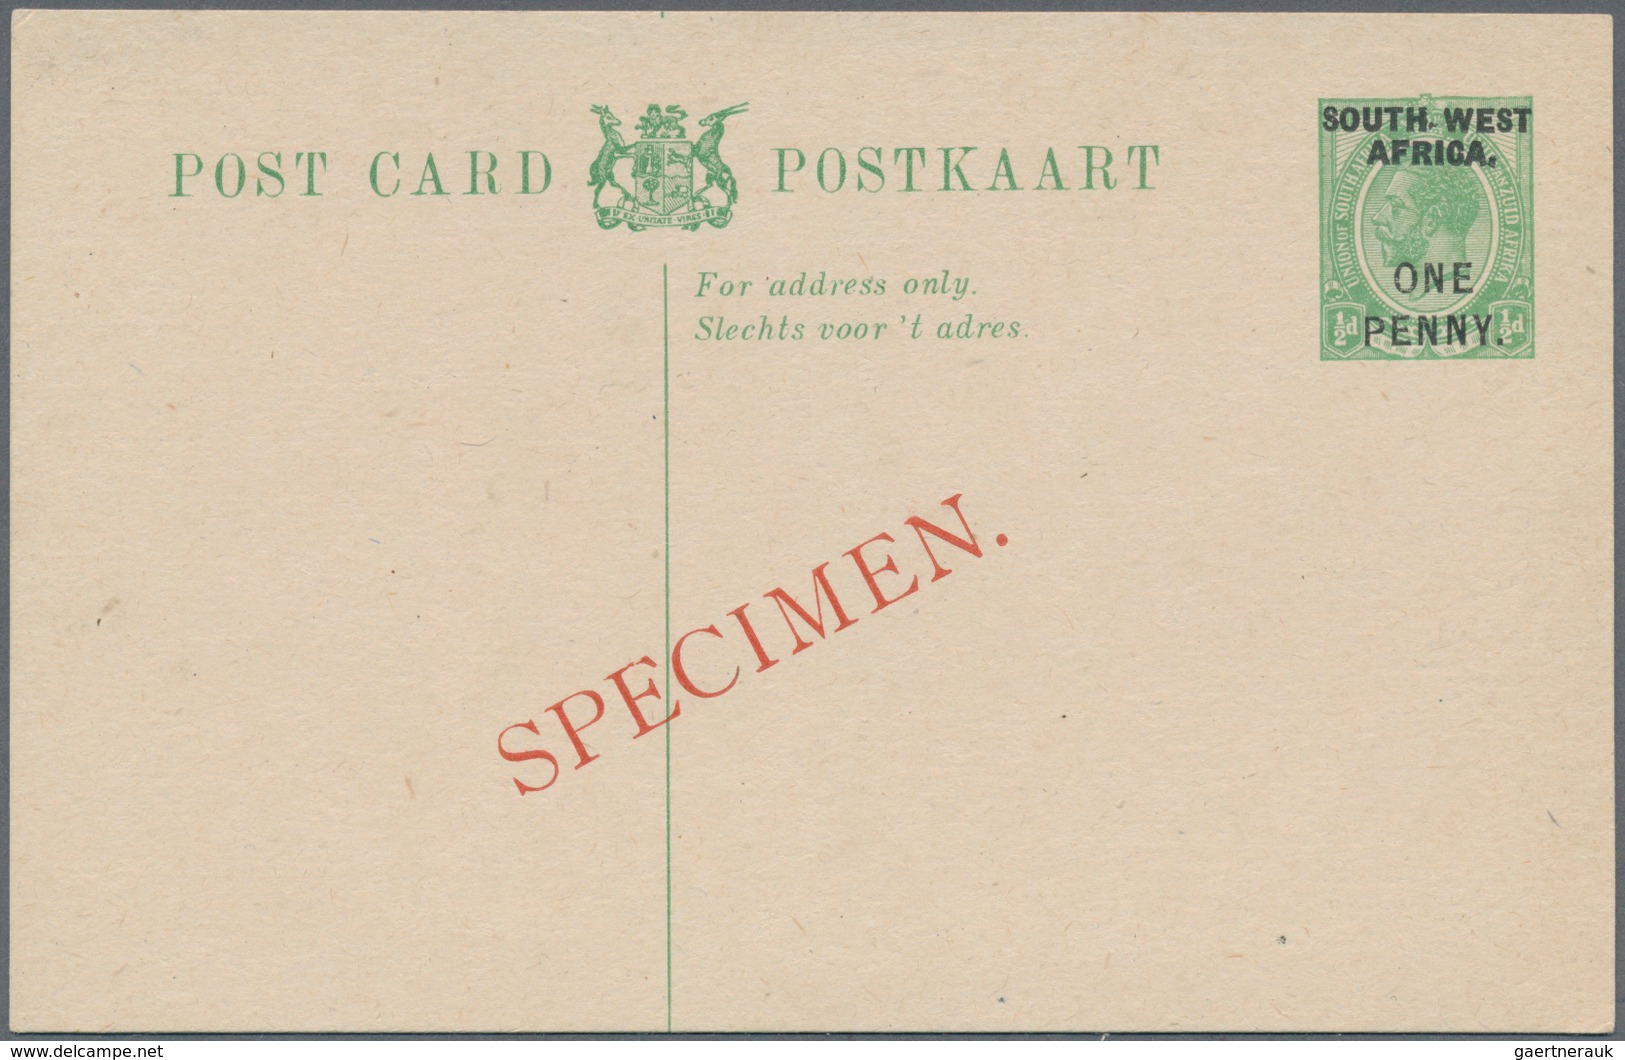 Südwestafrika: 1923/1930 (ca.), POSTAL STATIONERY: attractive group with nine different items all wi